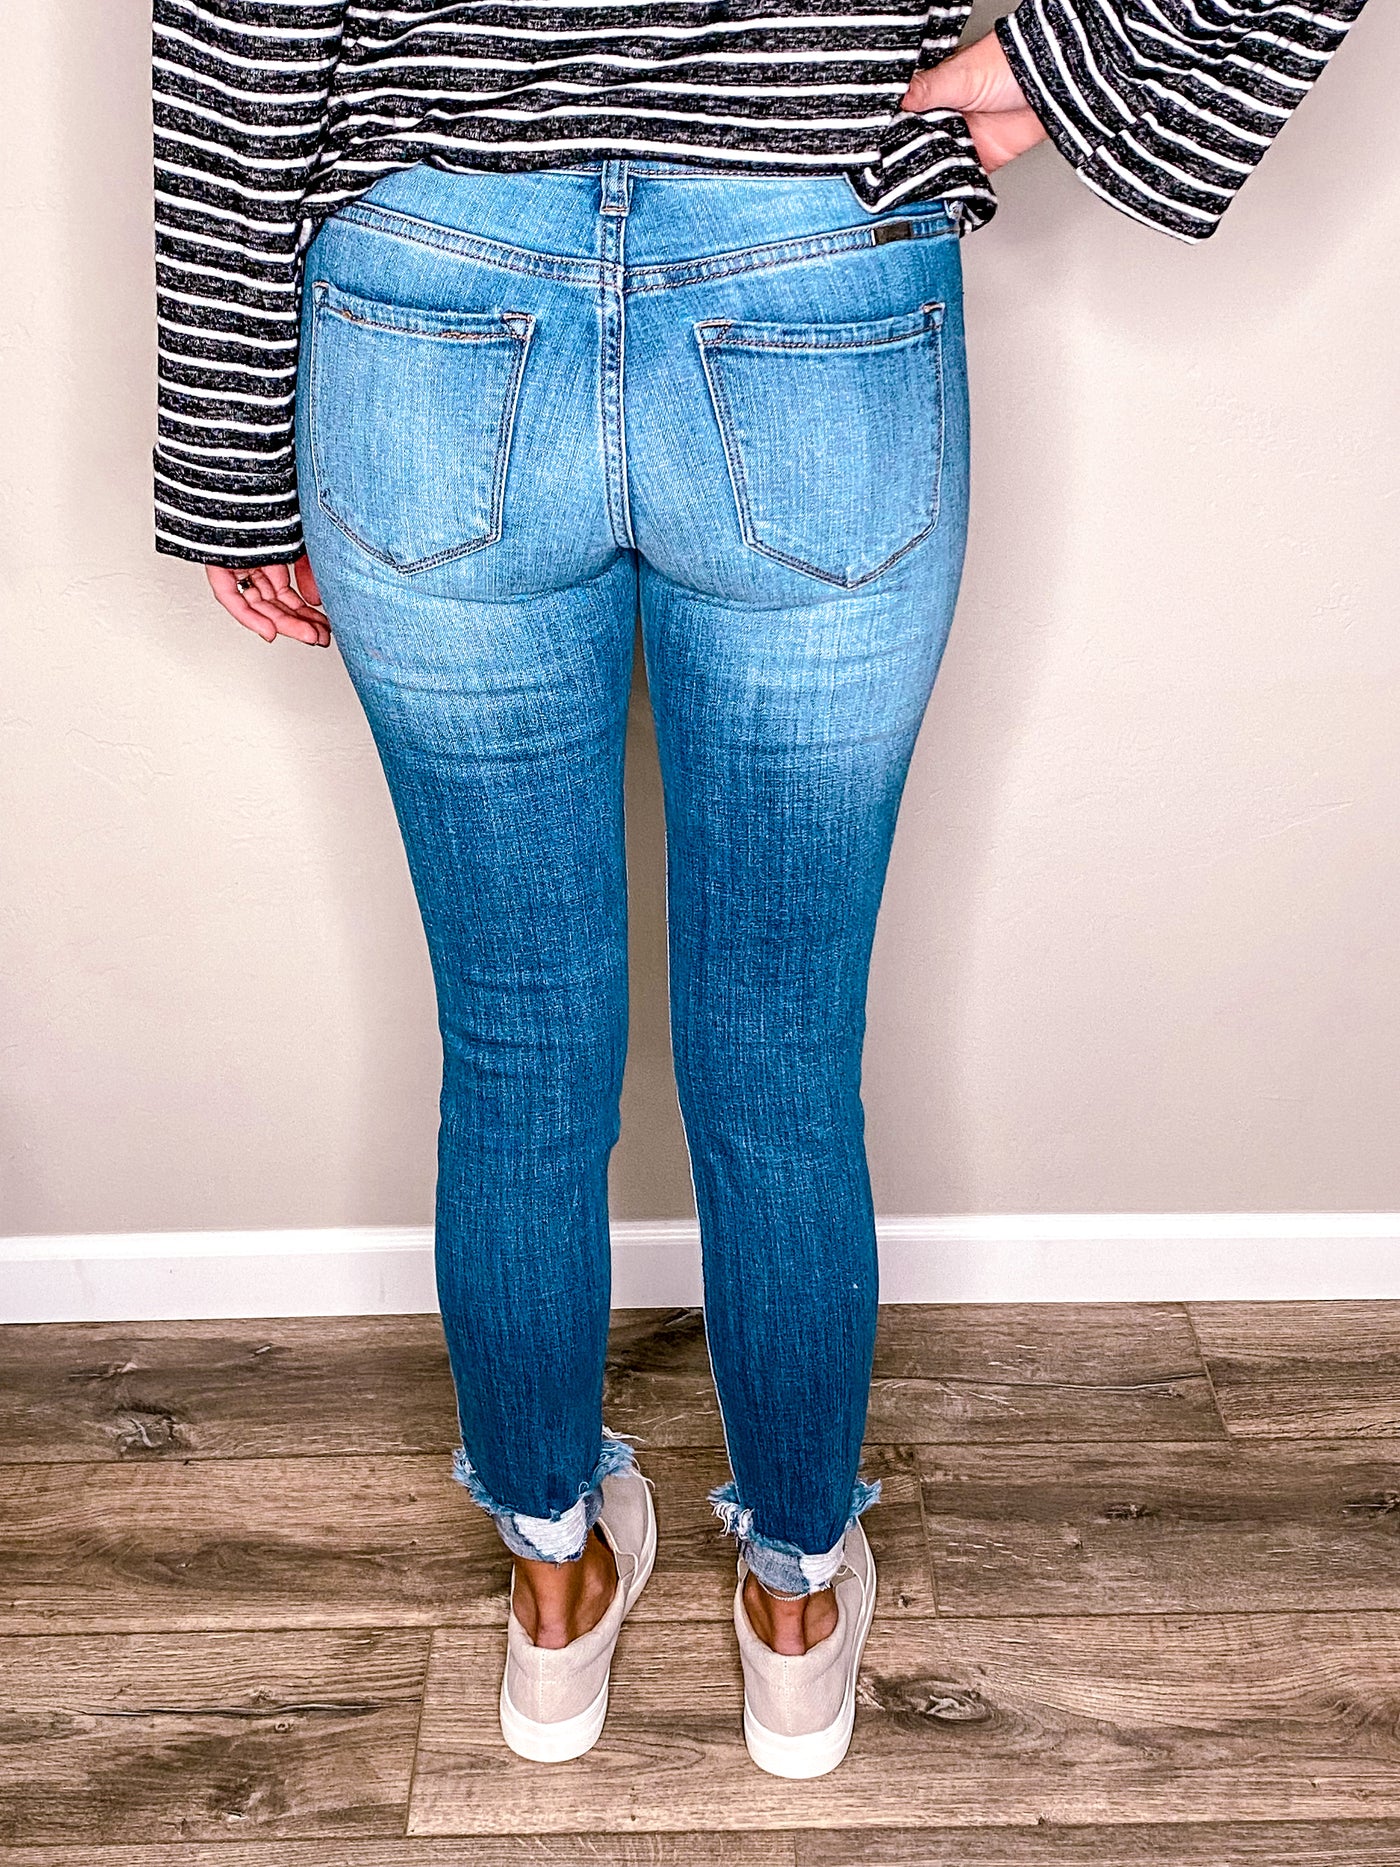 The Maisey Jeans